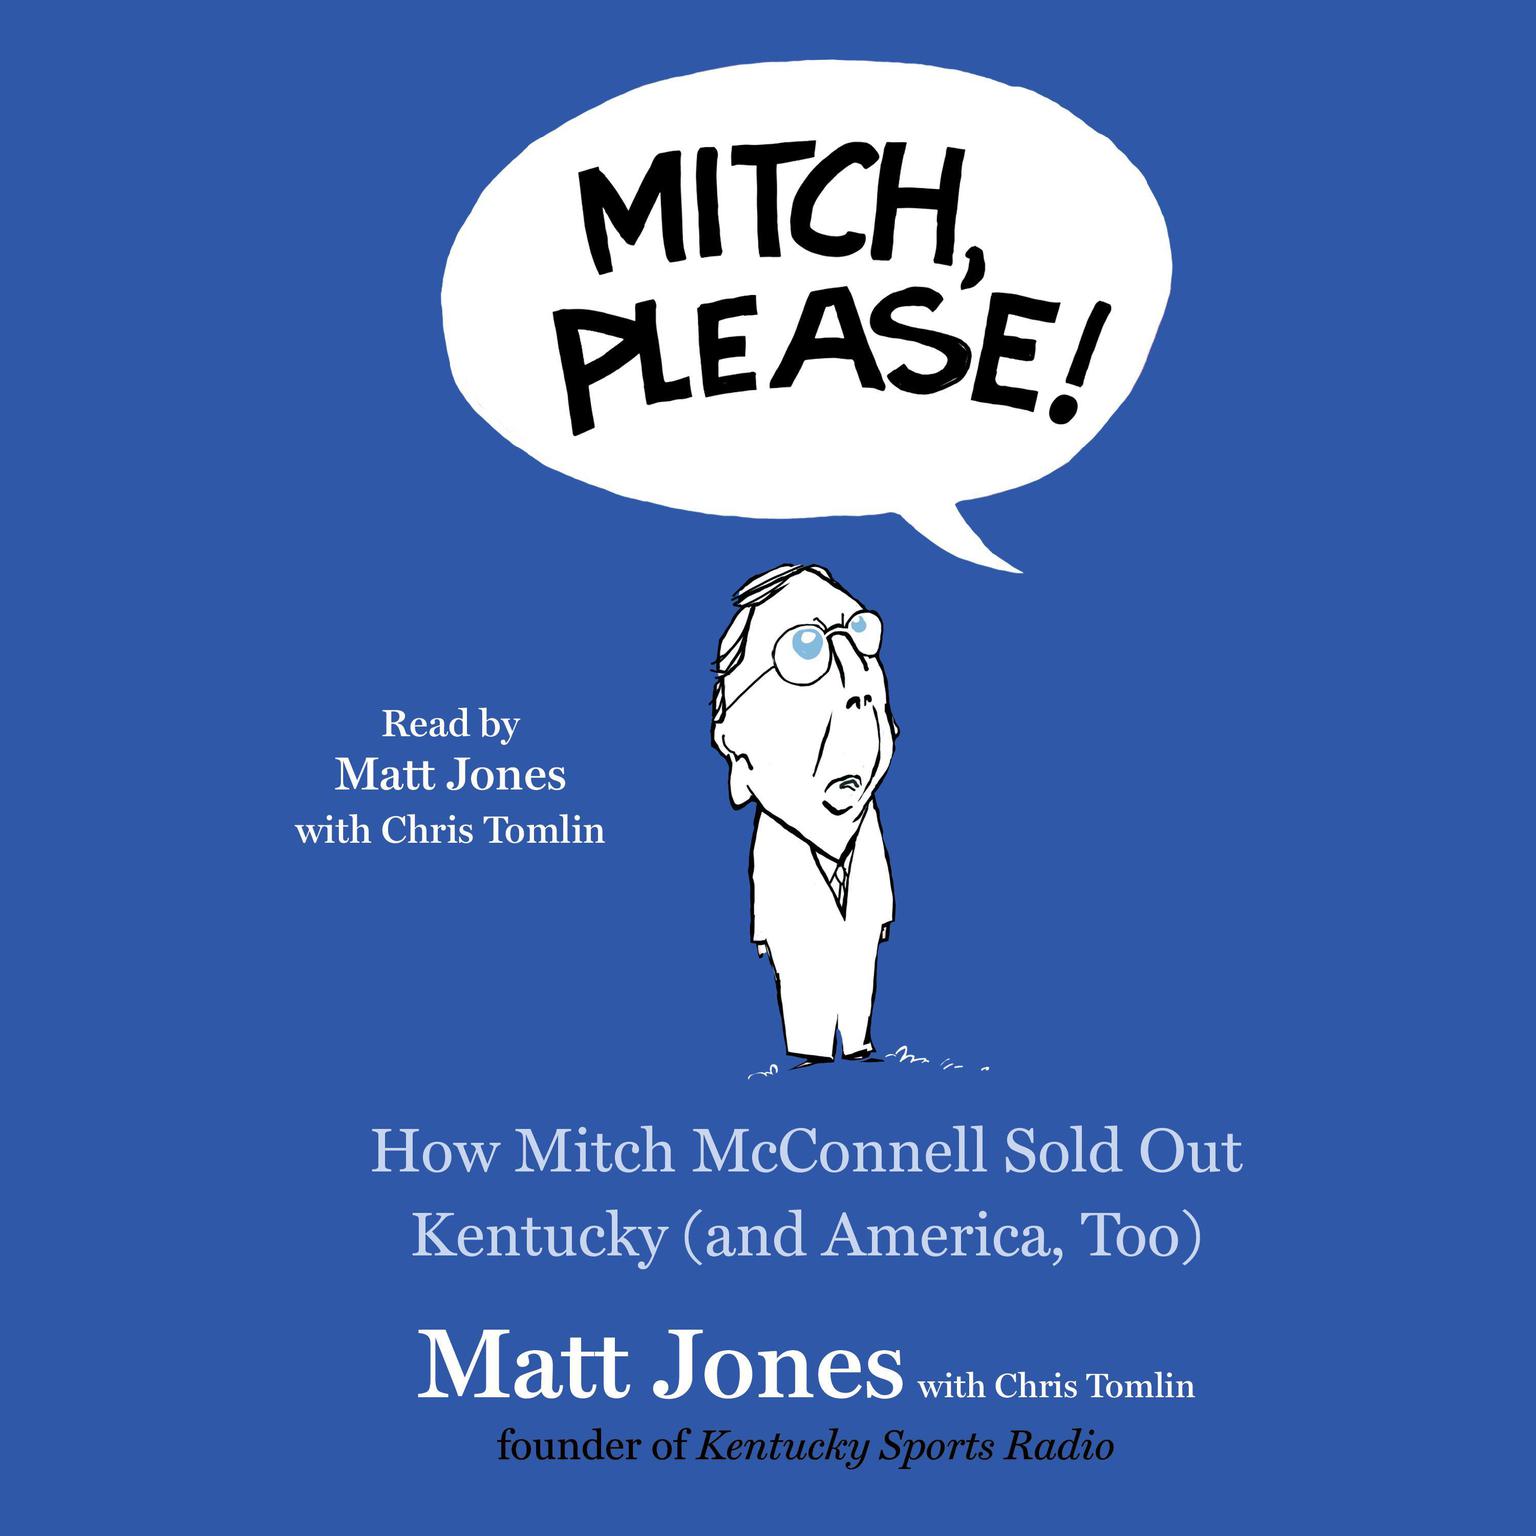 Mitch, Please!: How Mitch McConnell Sold Out Kentucky (and America too) Audiobook, by Matt Jones